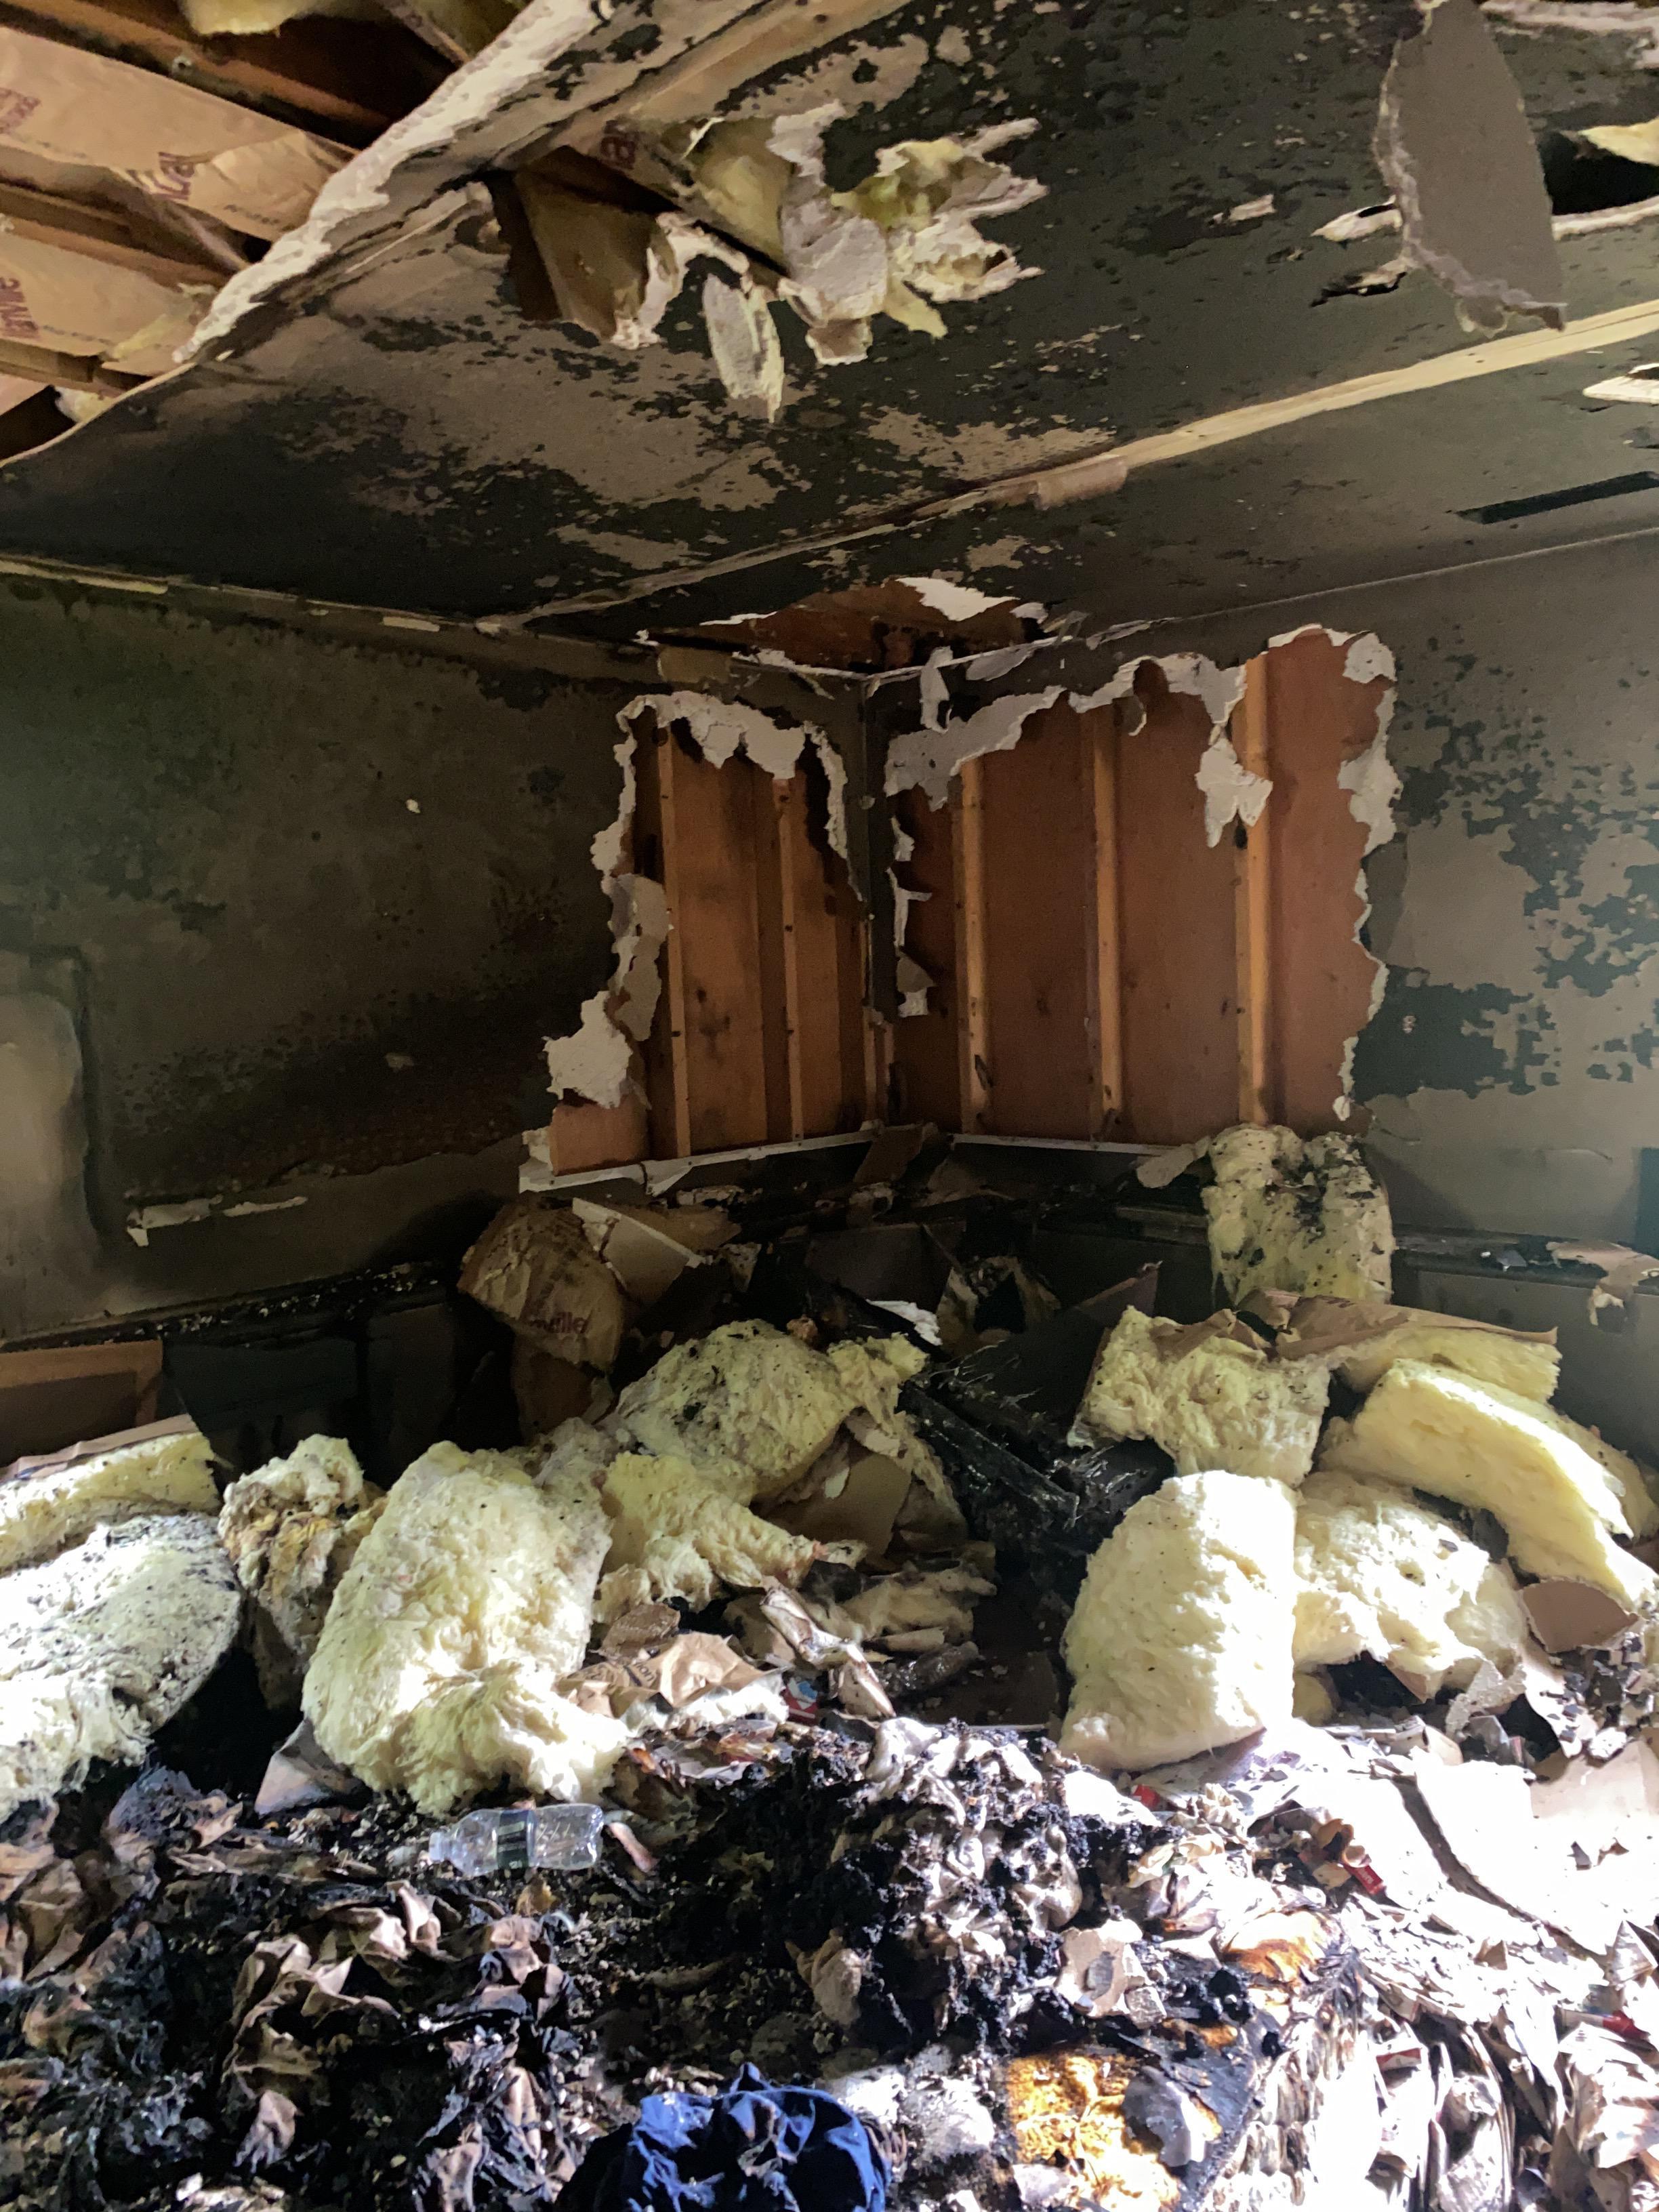 Fire and Water Damages a Home in Coldspring, NY